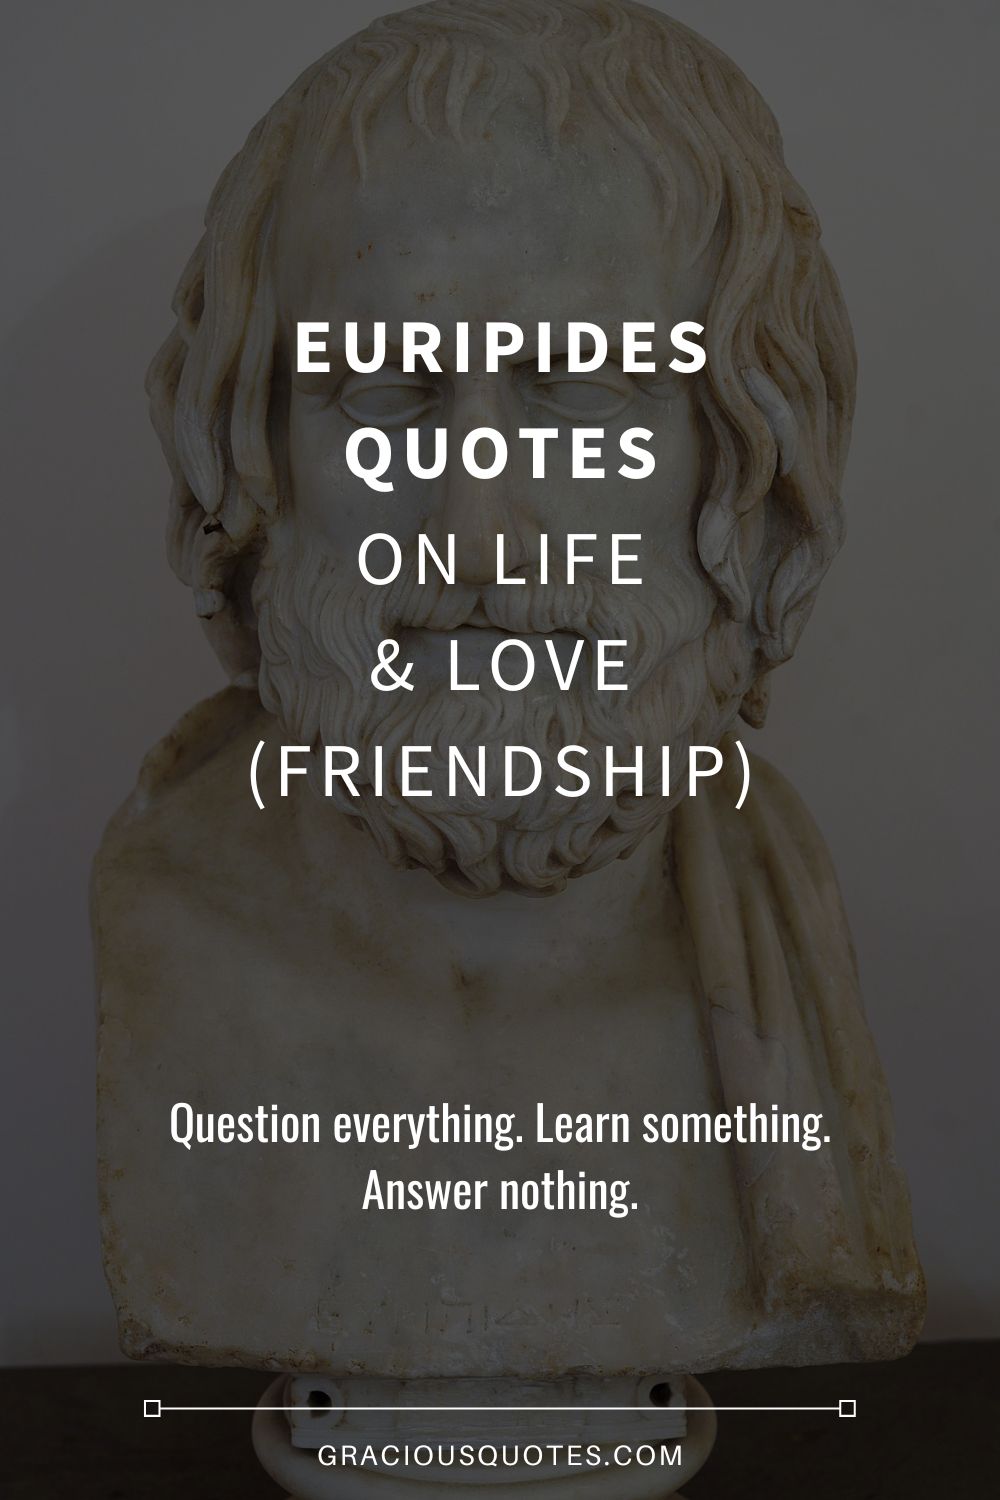 Euripides Quotes on Life & Love (FRIENDSHIP) - Gracious Quotes